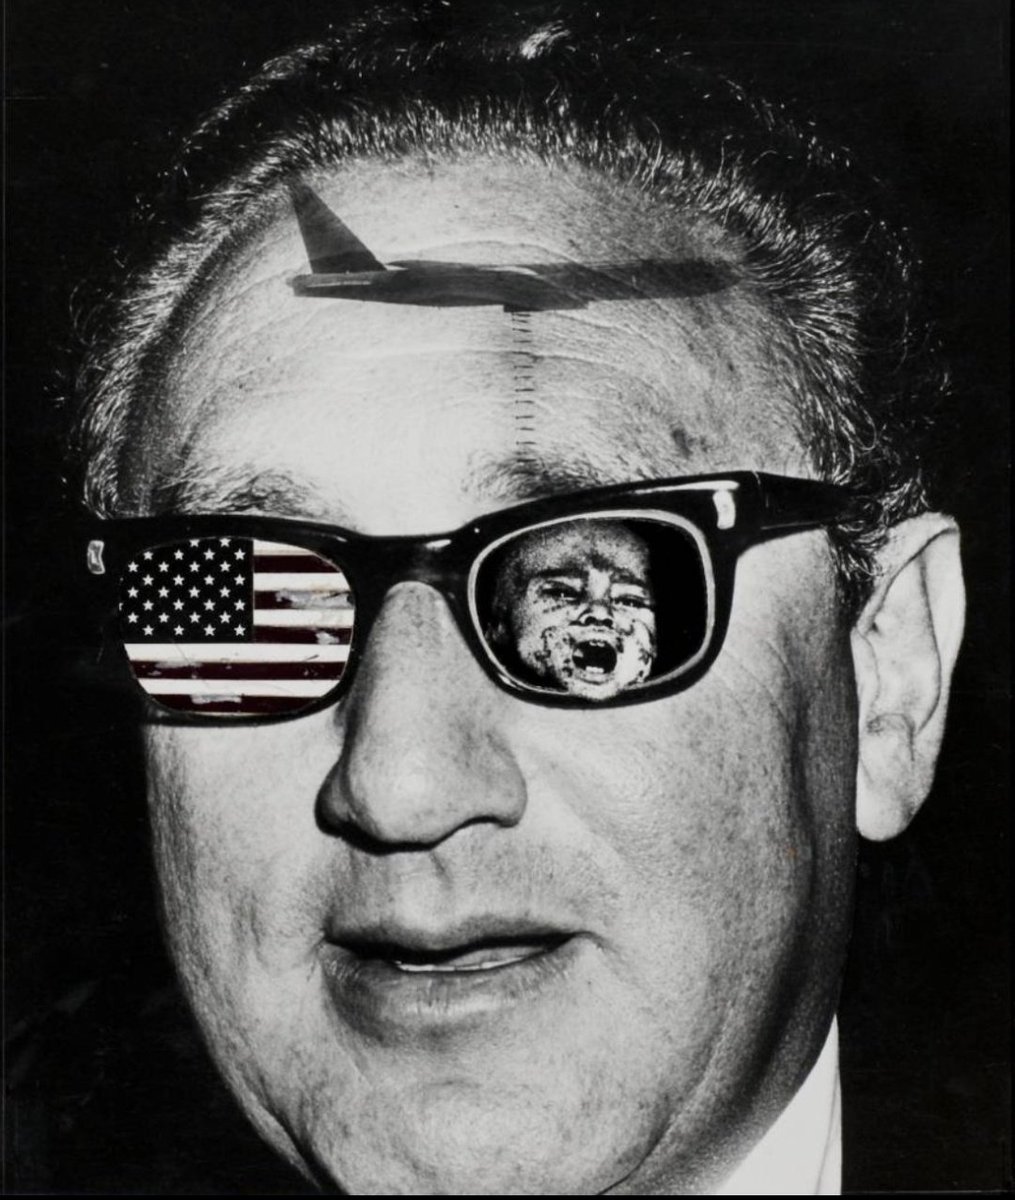 Former National Security Advisor and Secretary of State Henry Kissinger has died aged 100. Here is an incomplete list of his crimes. Henry Kissinger personally approved each of the 3,875 bombing raids in Cambodia between 1969-70, which ki!!ed between 150,000-500,000 people